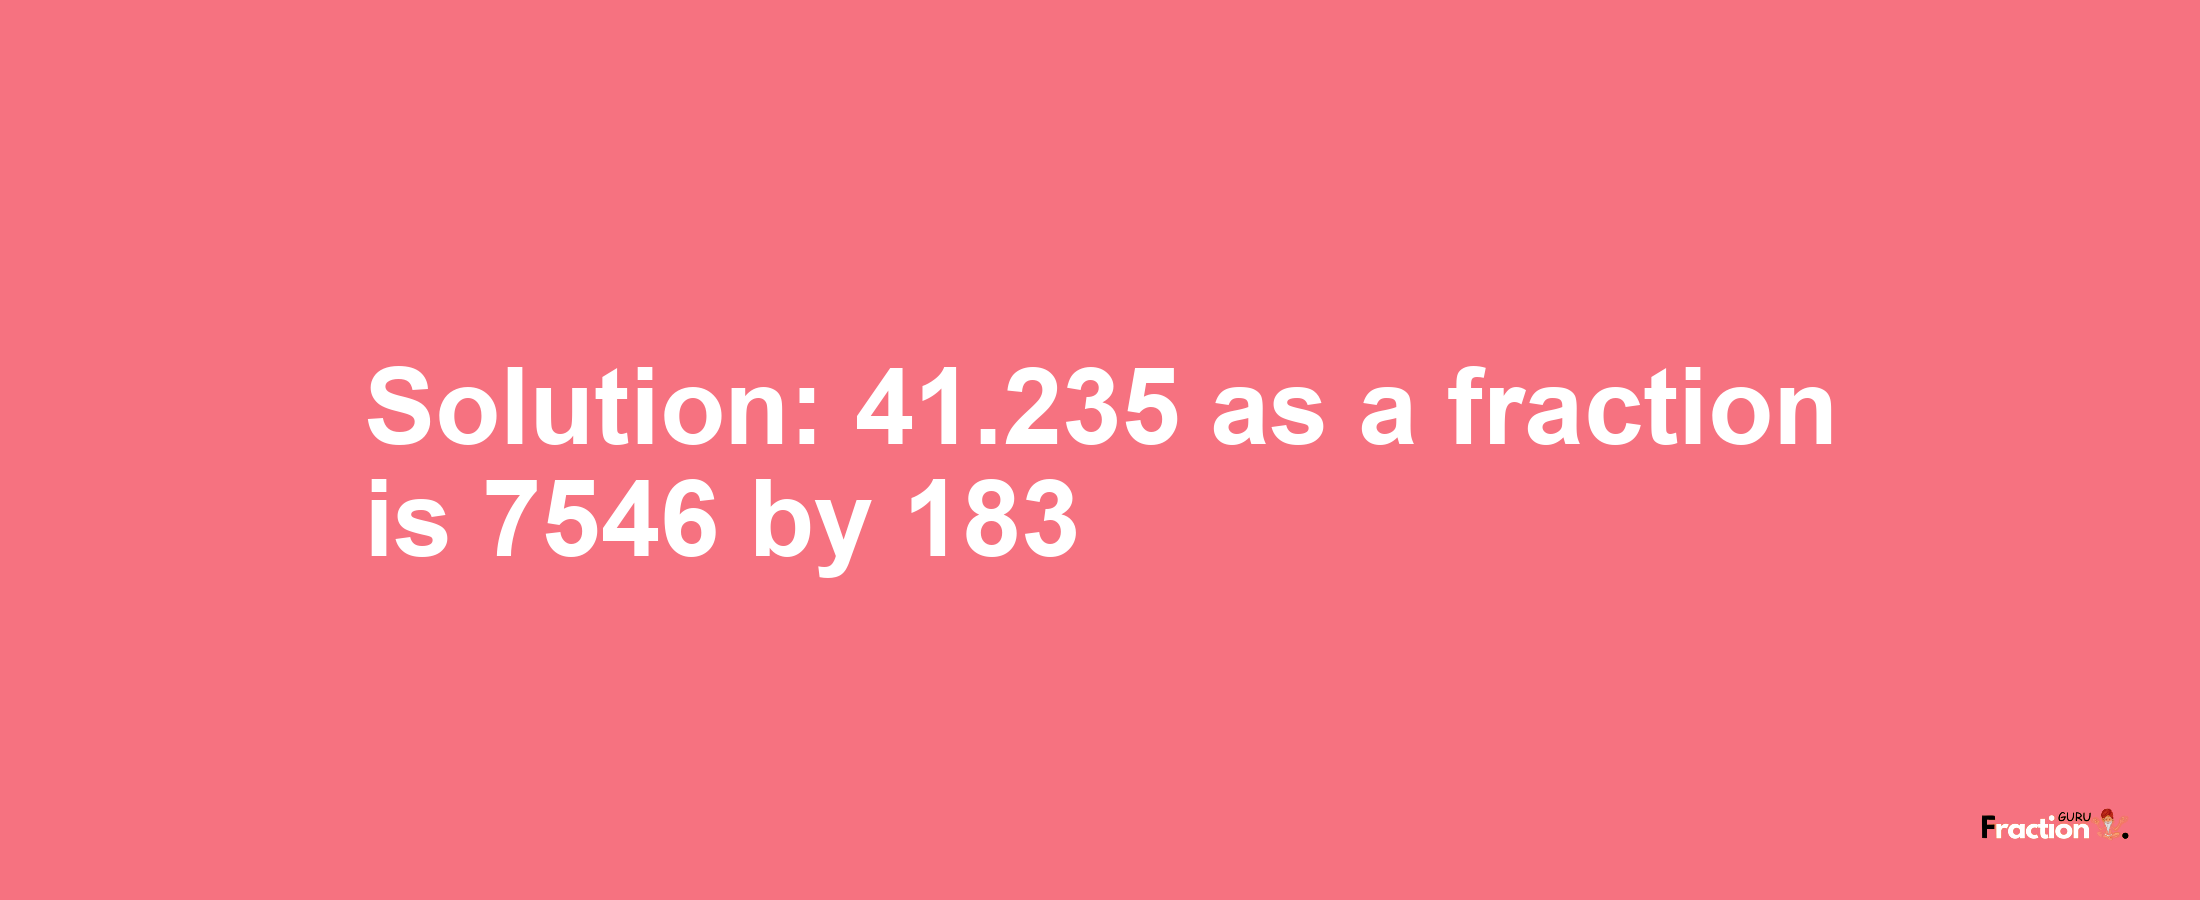 Solution:41.235 as a fraction is 7546/183